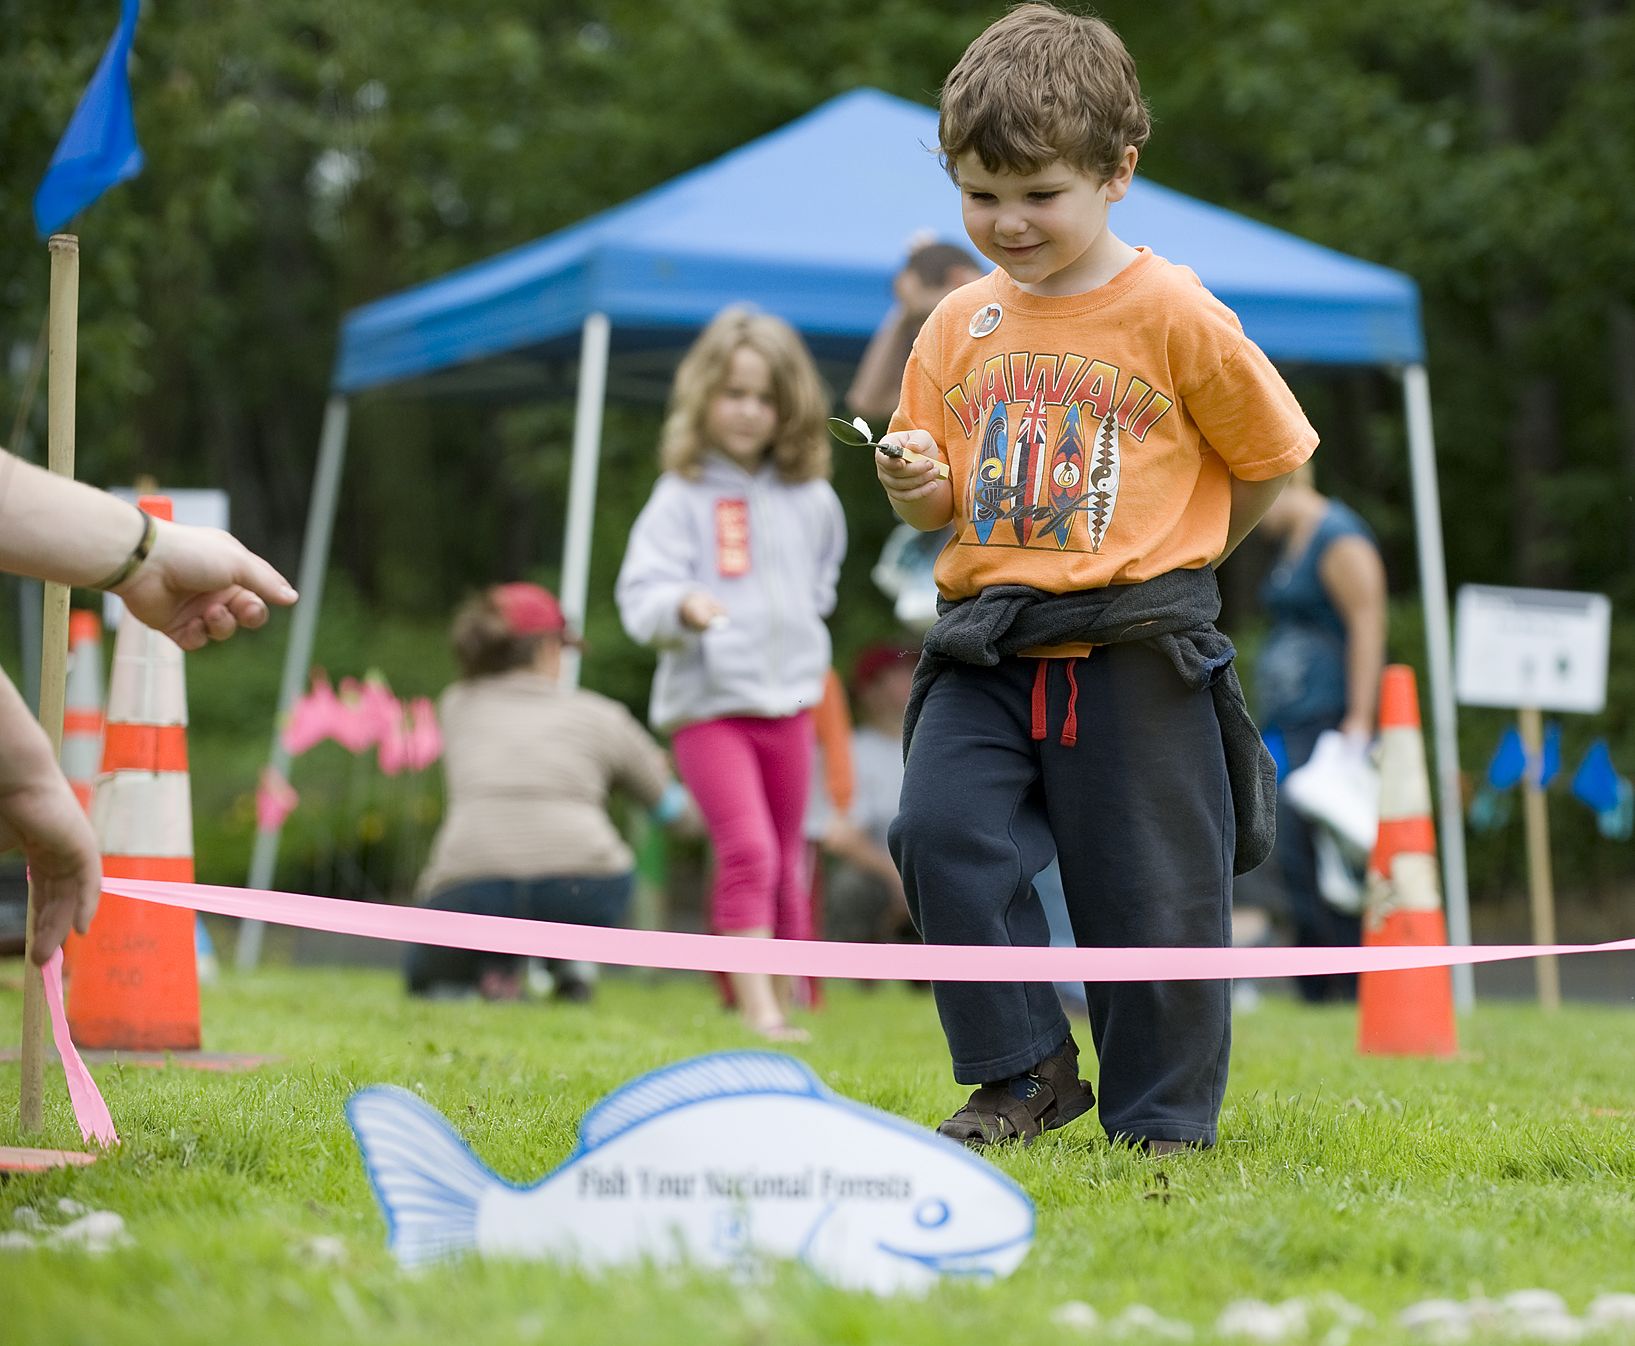 The Water Resources Education Center in Vancouver celebrates National Get Outdoors Day today.